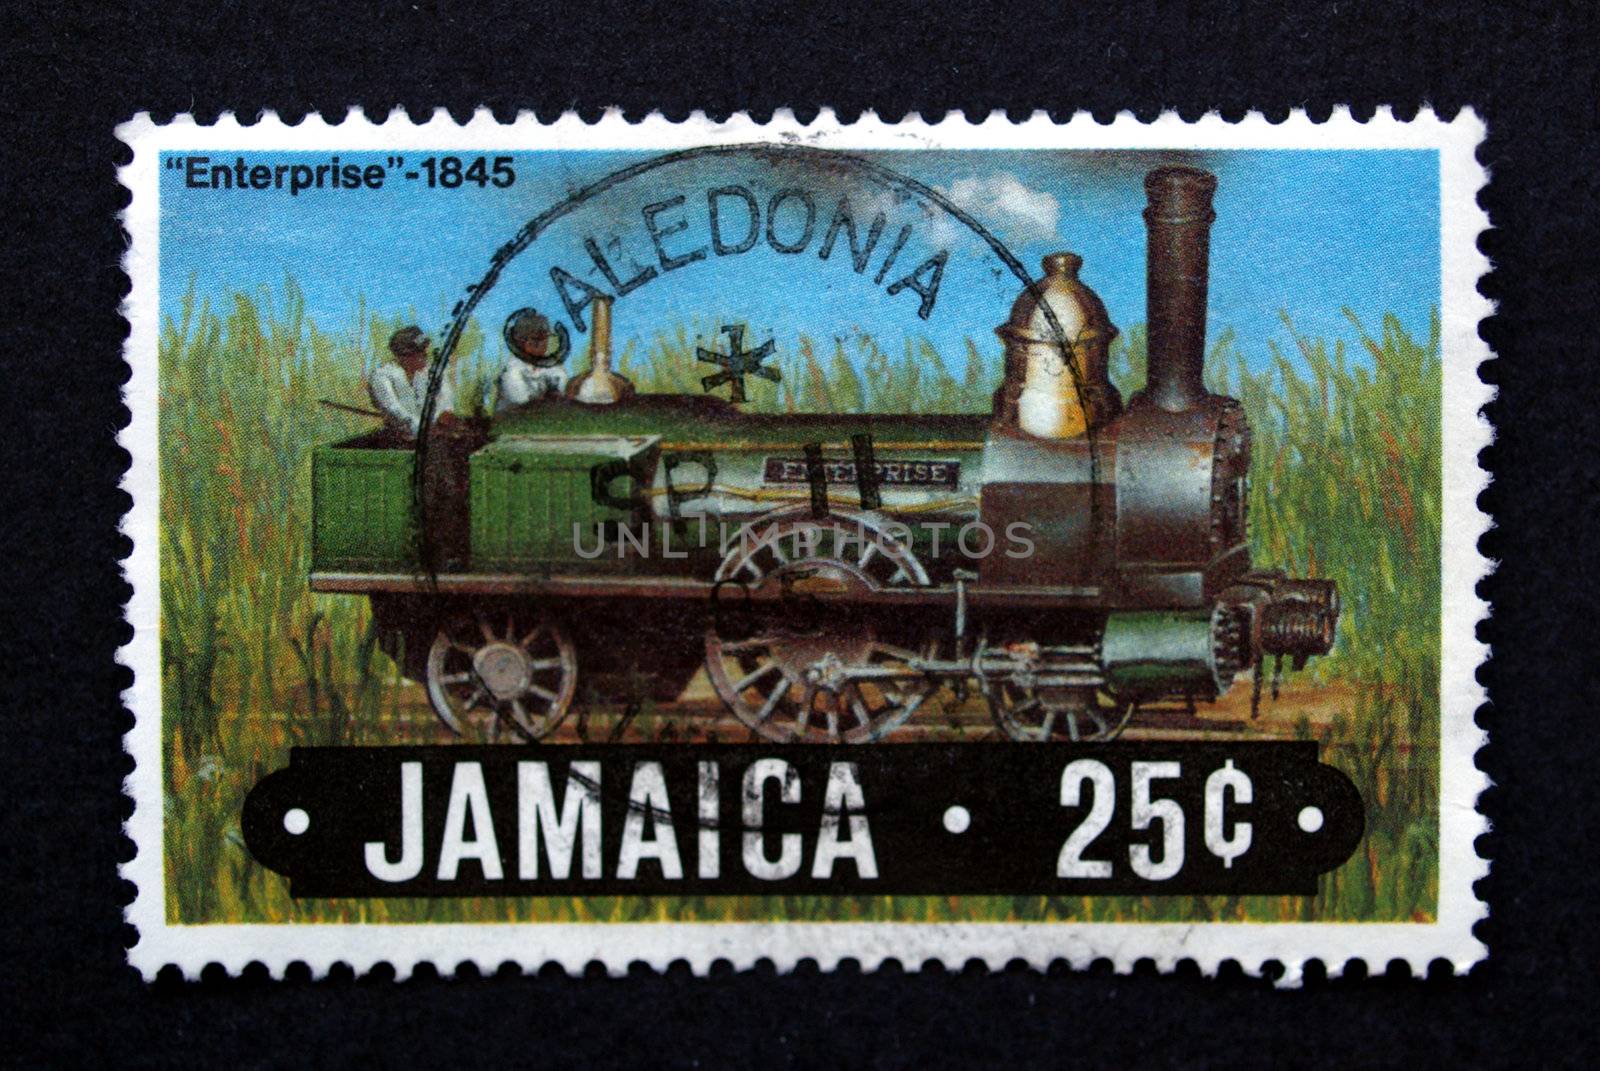 Jamaica stamp by paolo77